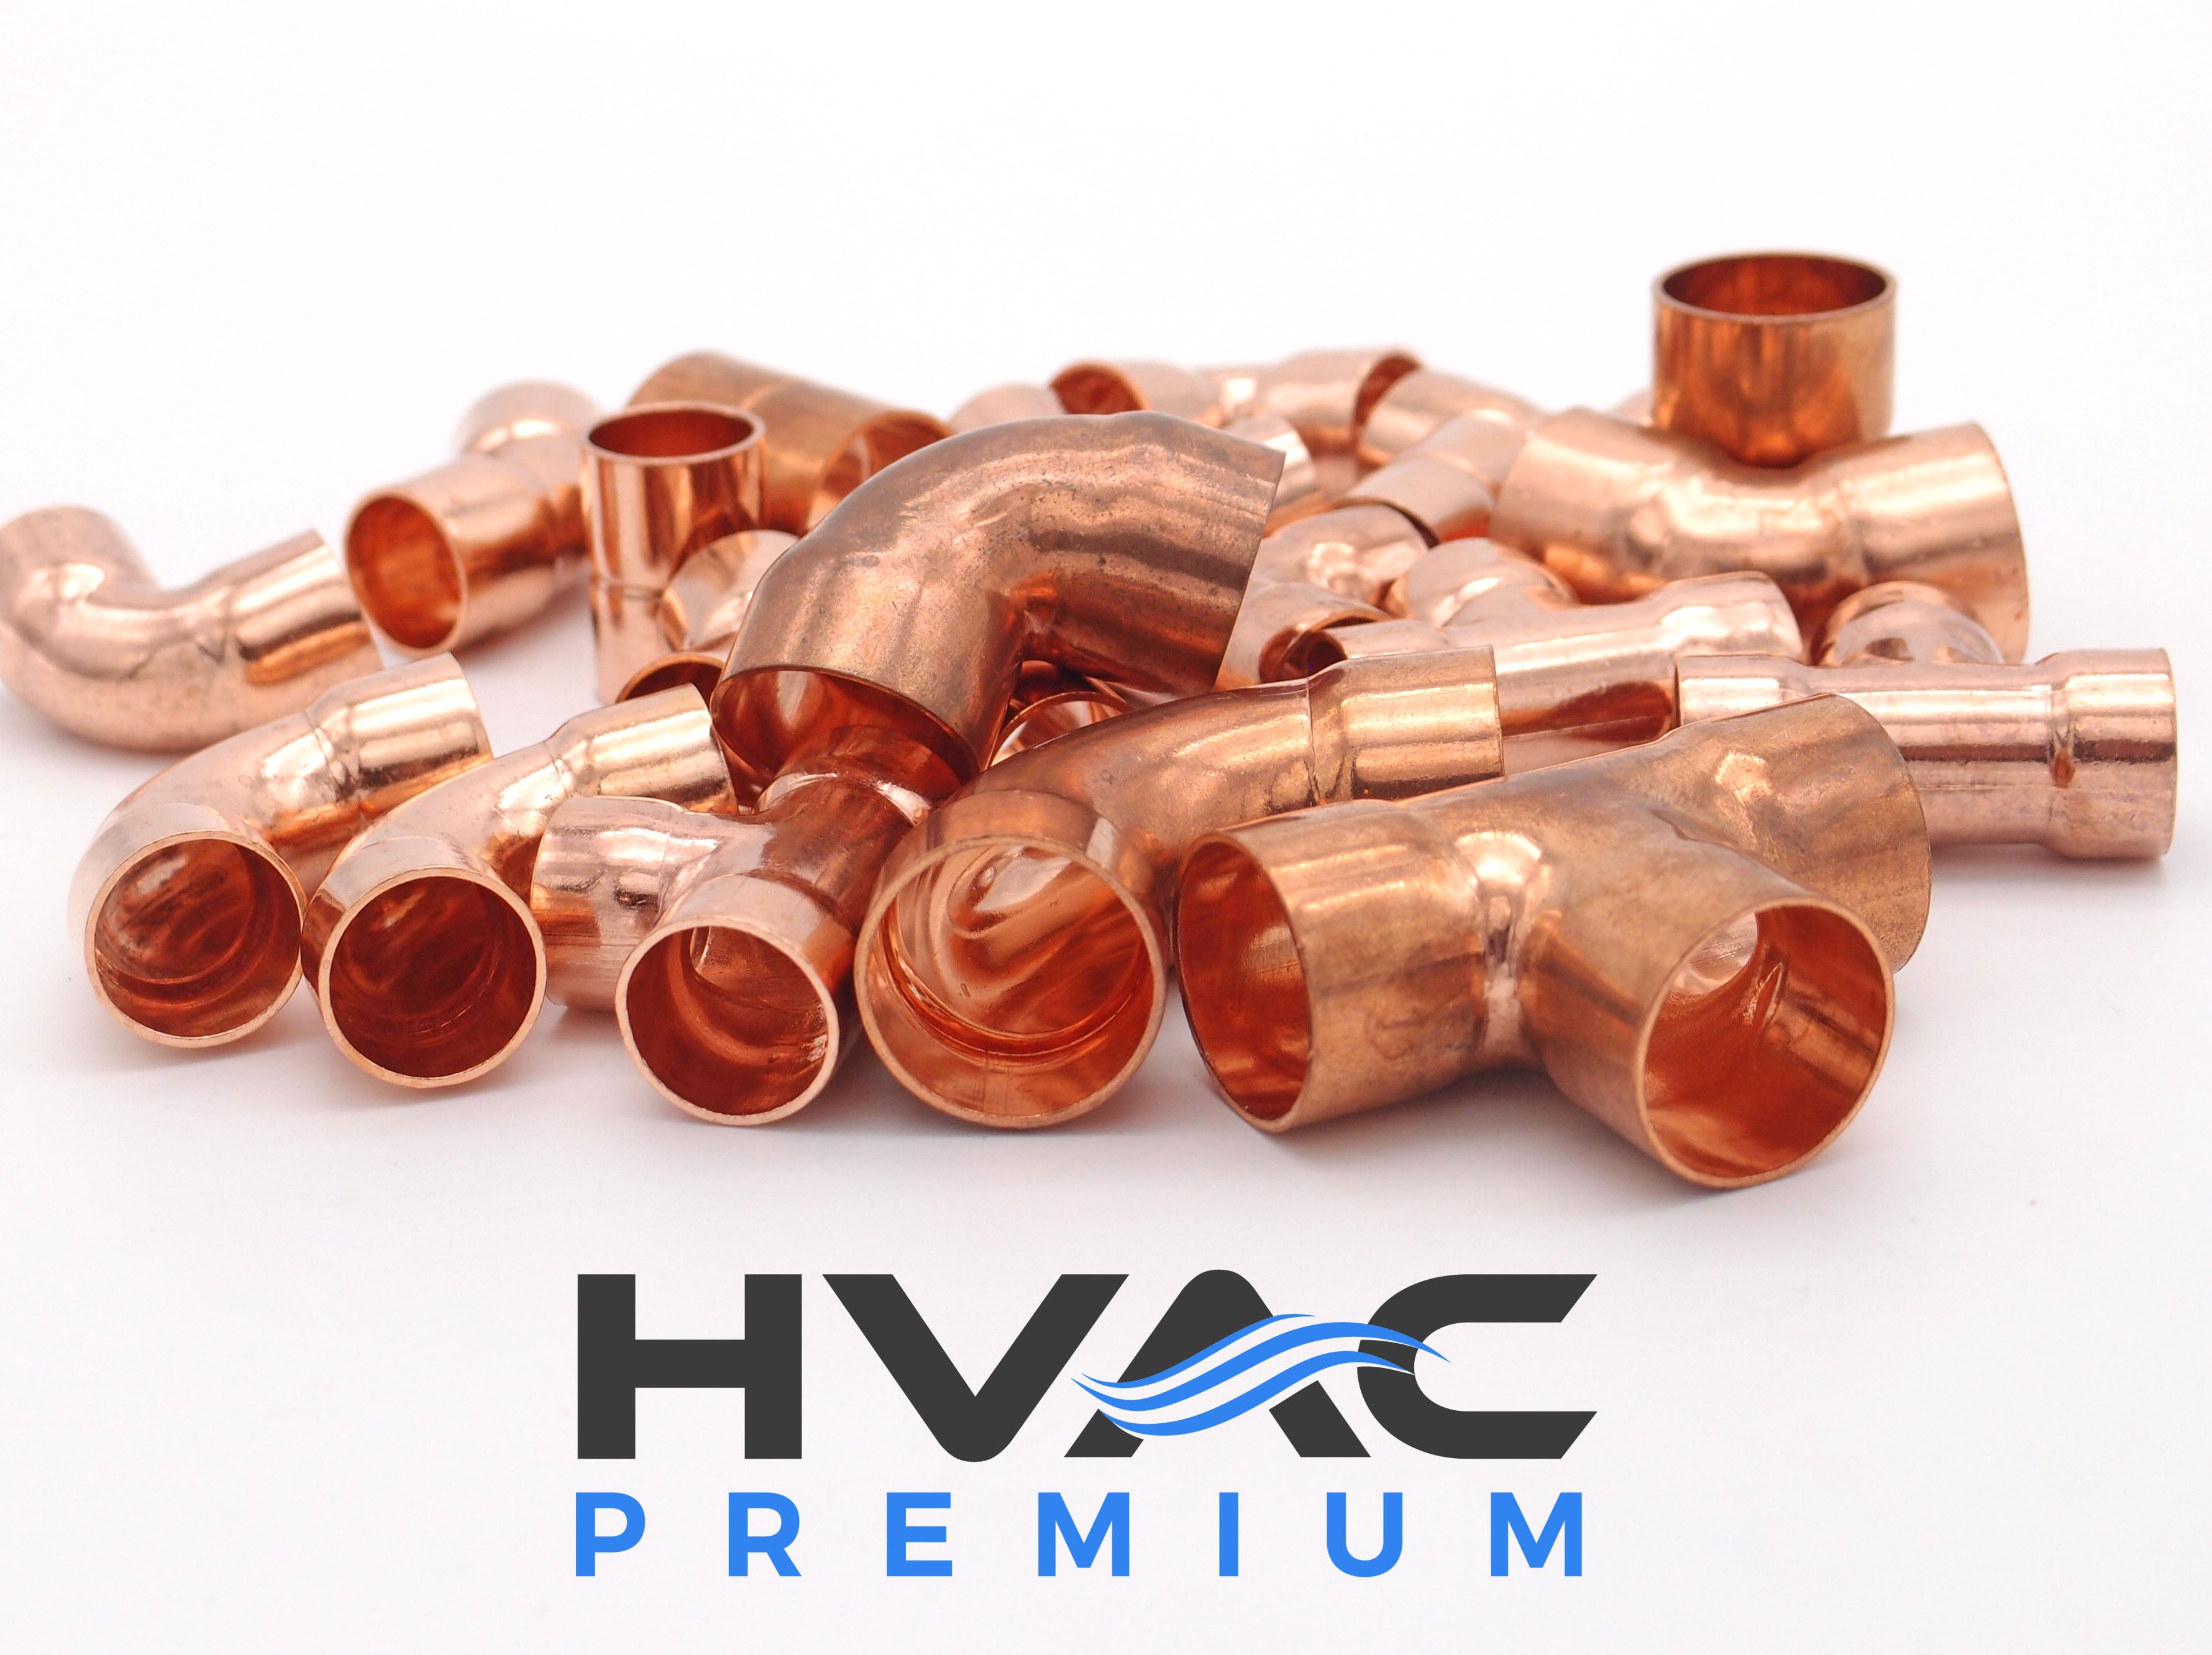 Copper Fitting 7/8 to 5/8 (HVAC Dimensions) Reducer / Increaser Copper Coupling & HVAC – 3/4 to 1/2 (Plumbing Inner Dimensions) 99.9% Pure Copper - 10 Pack